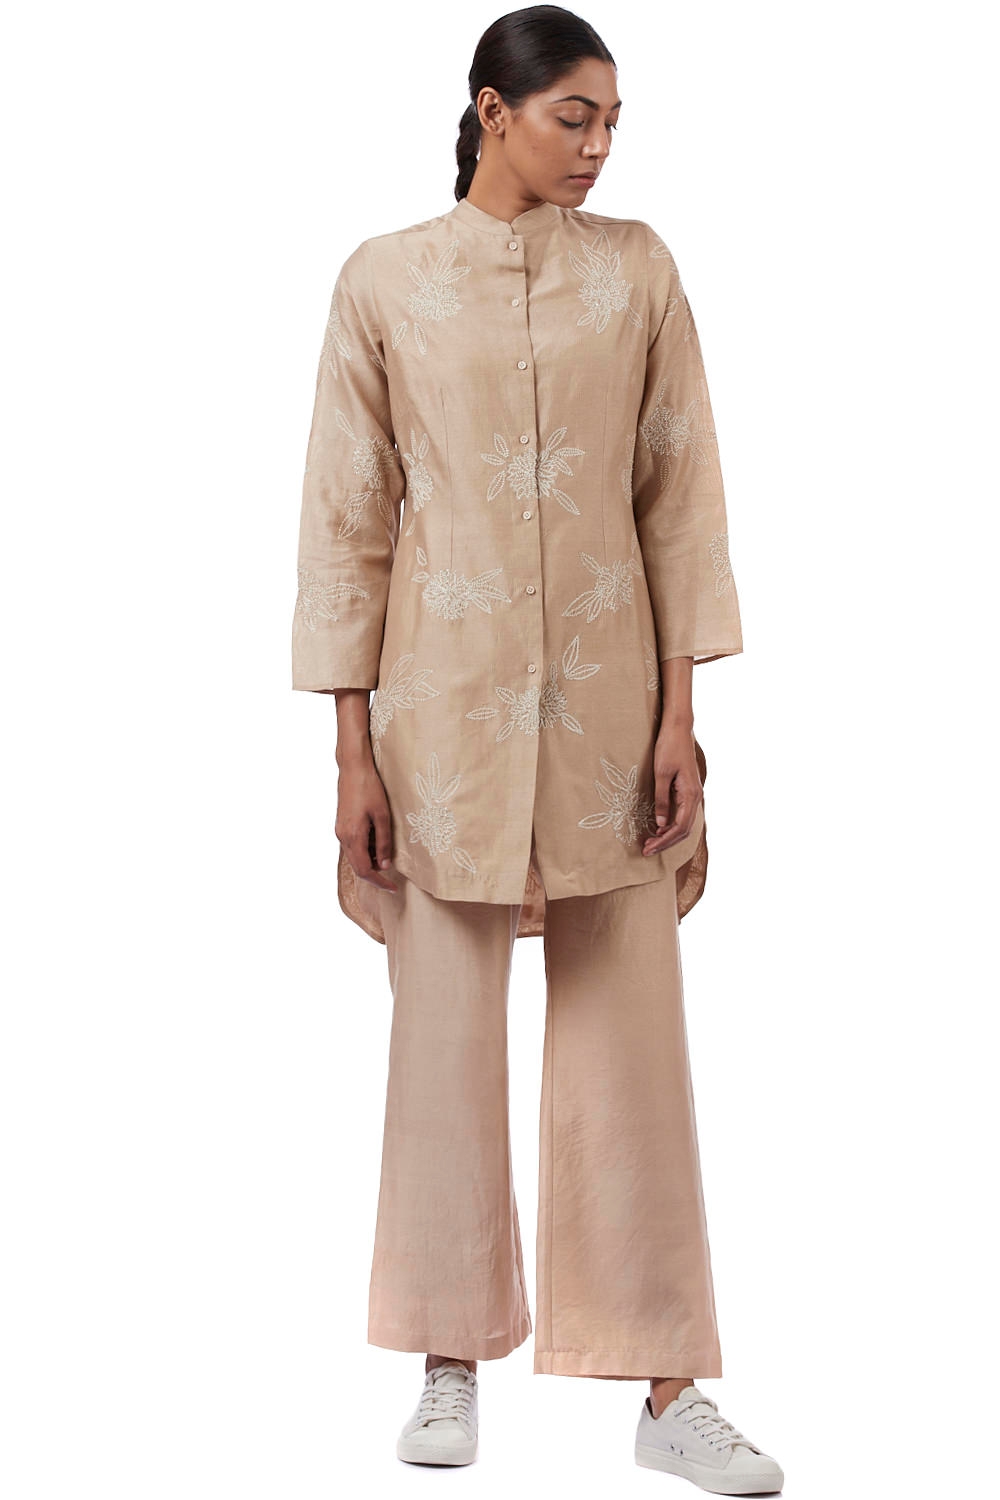 ABRAHAM AND THAKORE | Sequin Embroidered Floral Maheshwar Shirt